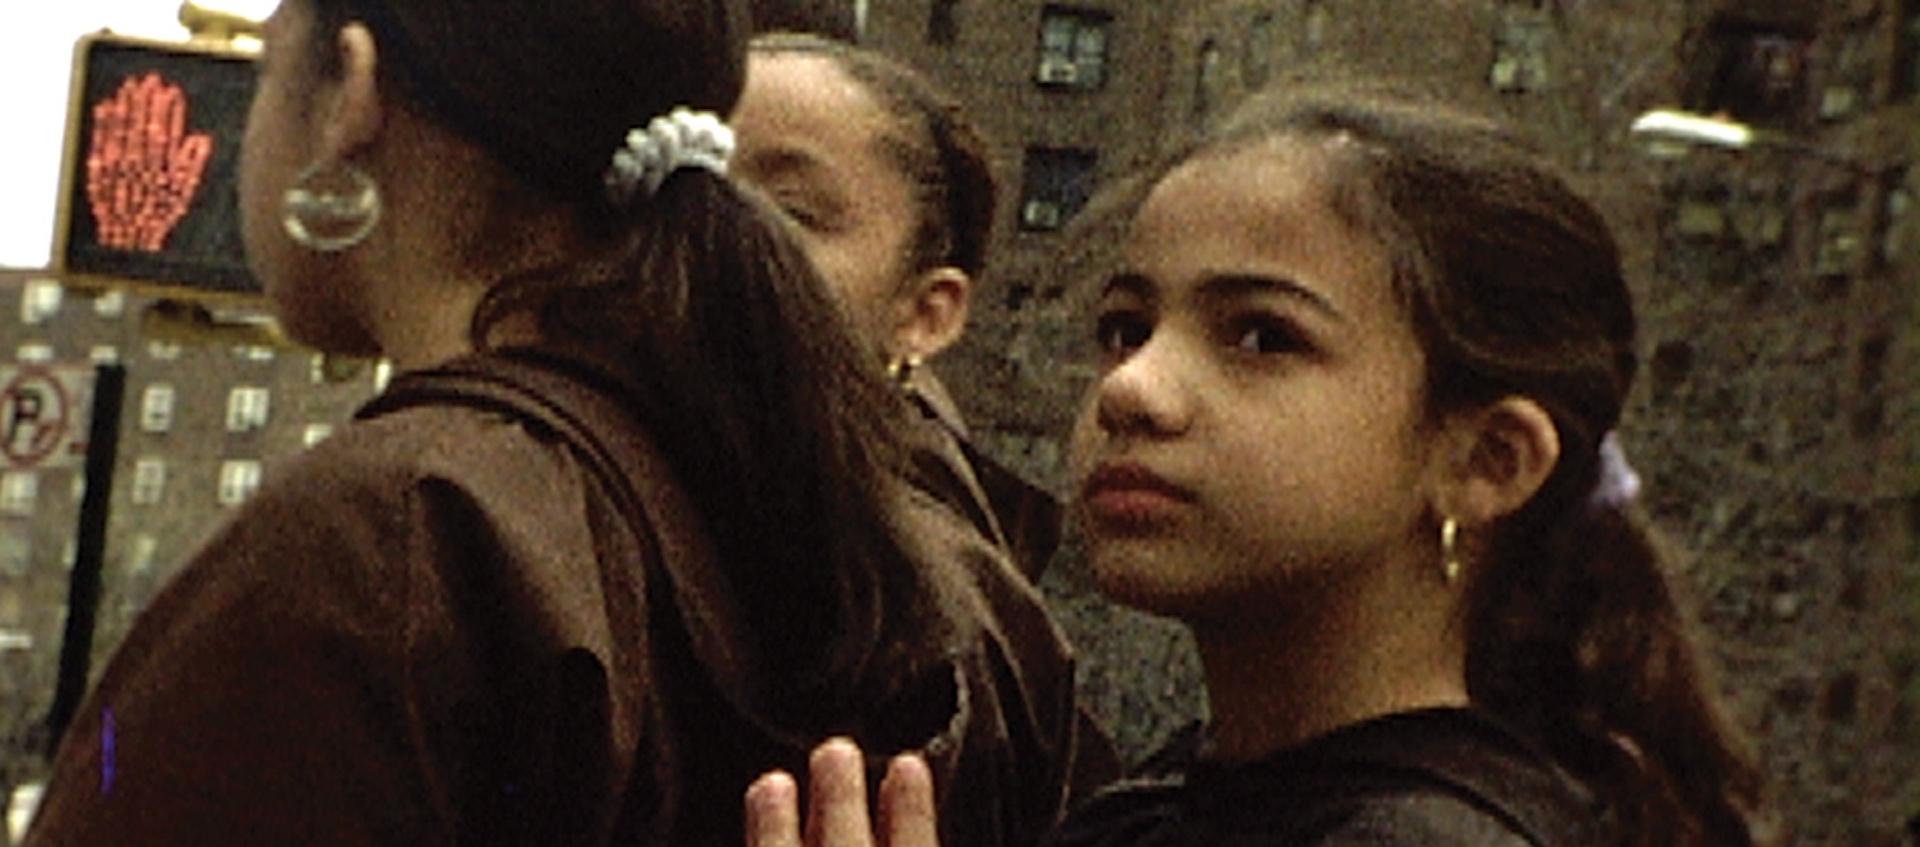 A young girl stands on a street corner behind a woman and looks to the left in a scene from Jeanne Liotta's video work Crosswalk